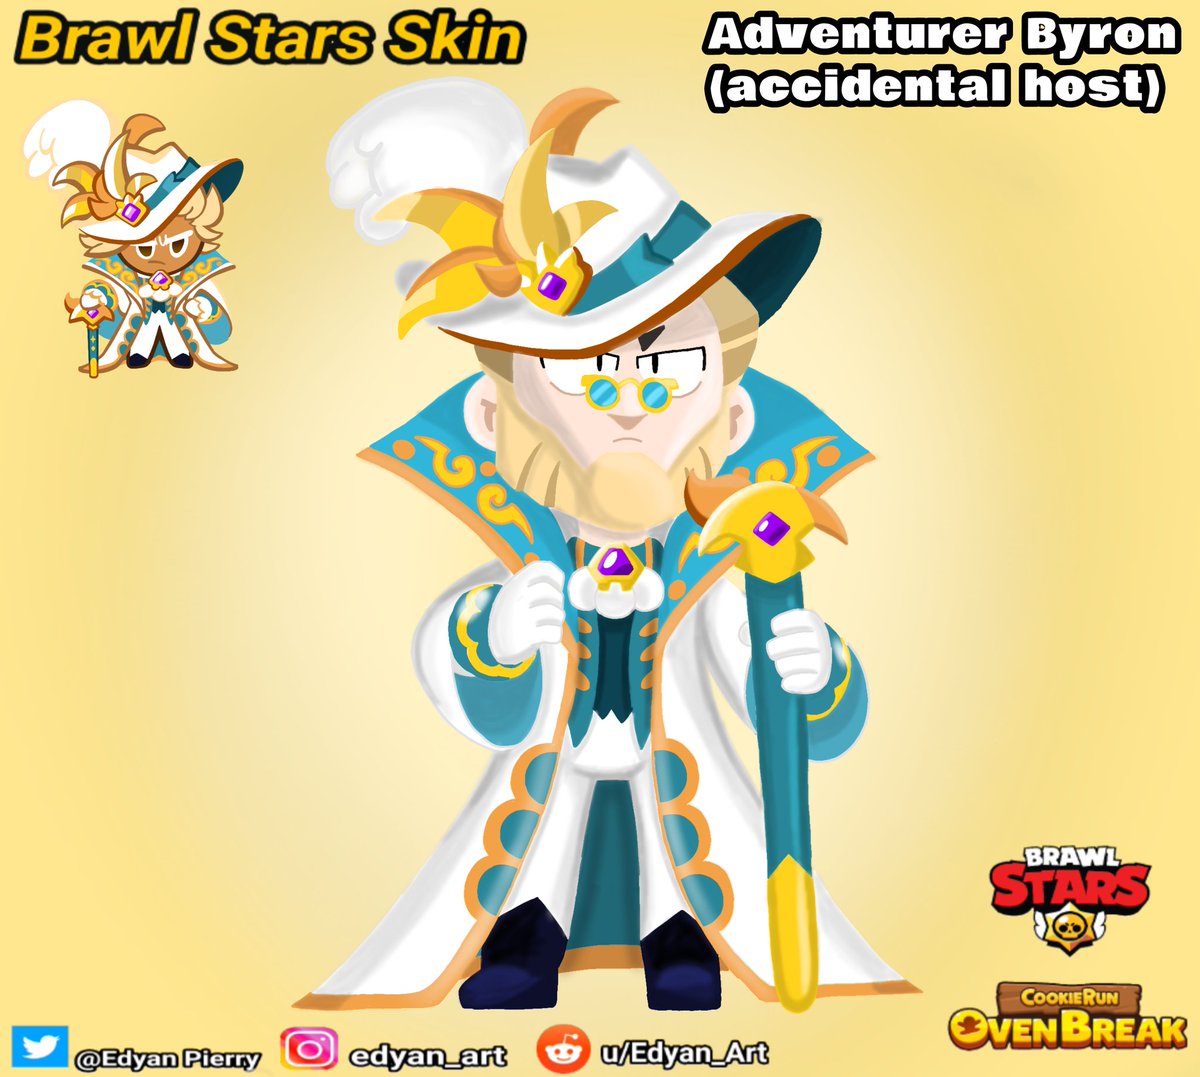 Edyan Art On Twitter 60 Skin Skin For Byron Brawlstars Based On The Character Adventurer Cookie With The Skin Accidental Host From The Game Cookierun Brawlart Brawlstarsart Brawlstarsskin Brawlstarsbyron Cookierunovenbreak - brawl stars skins ideas byron